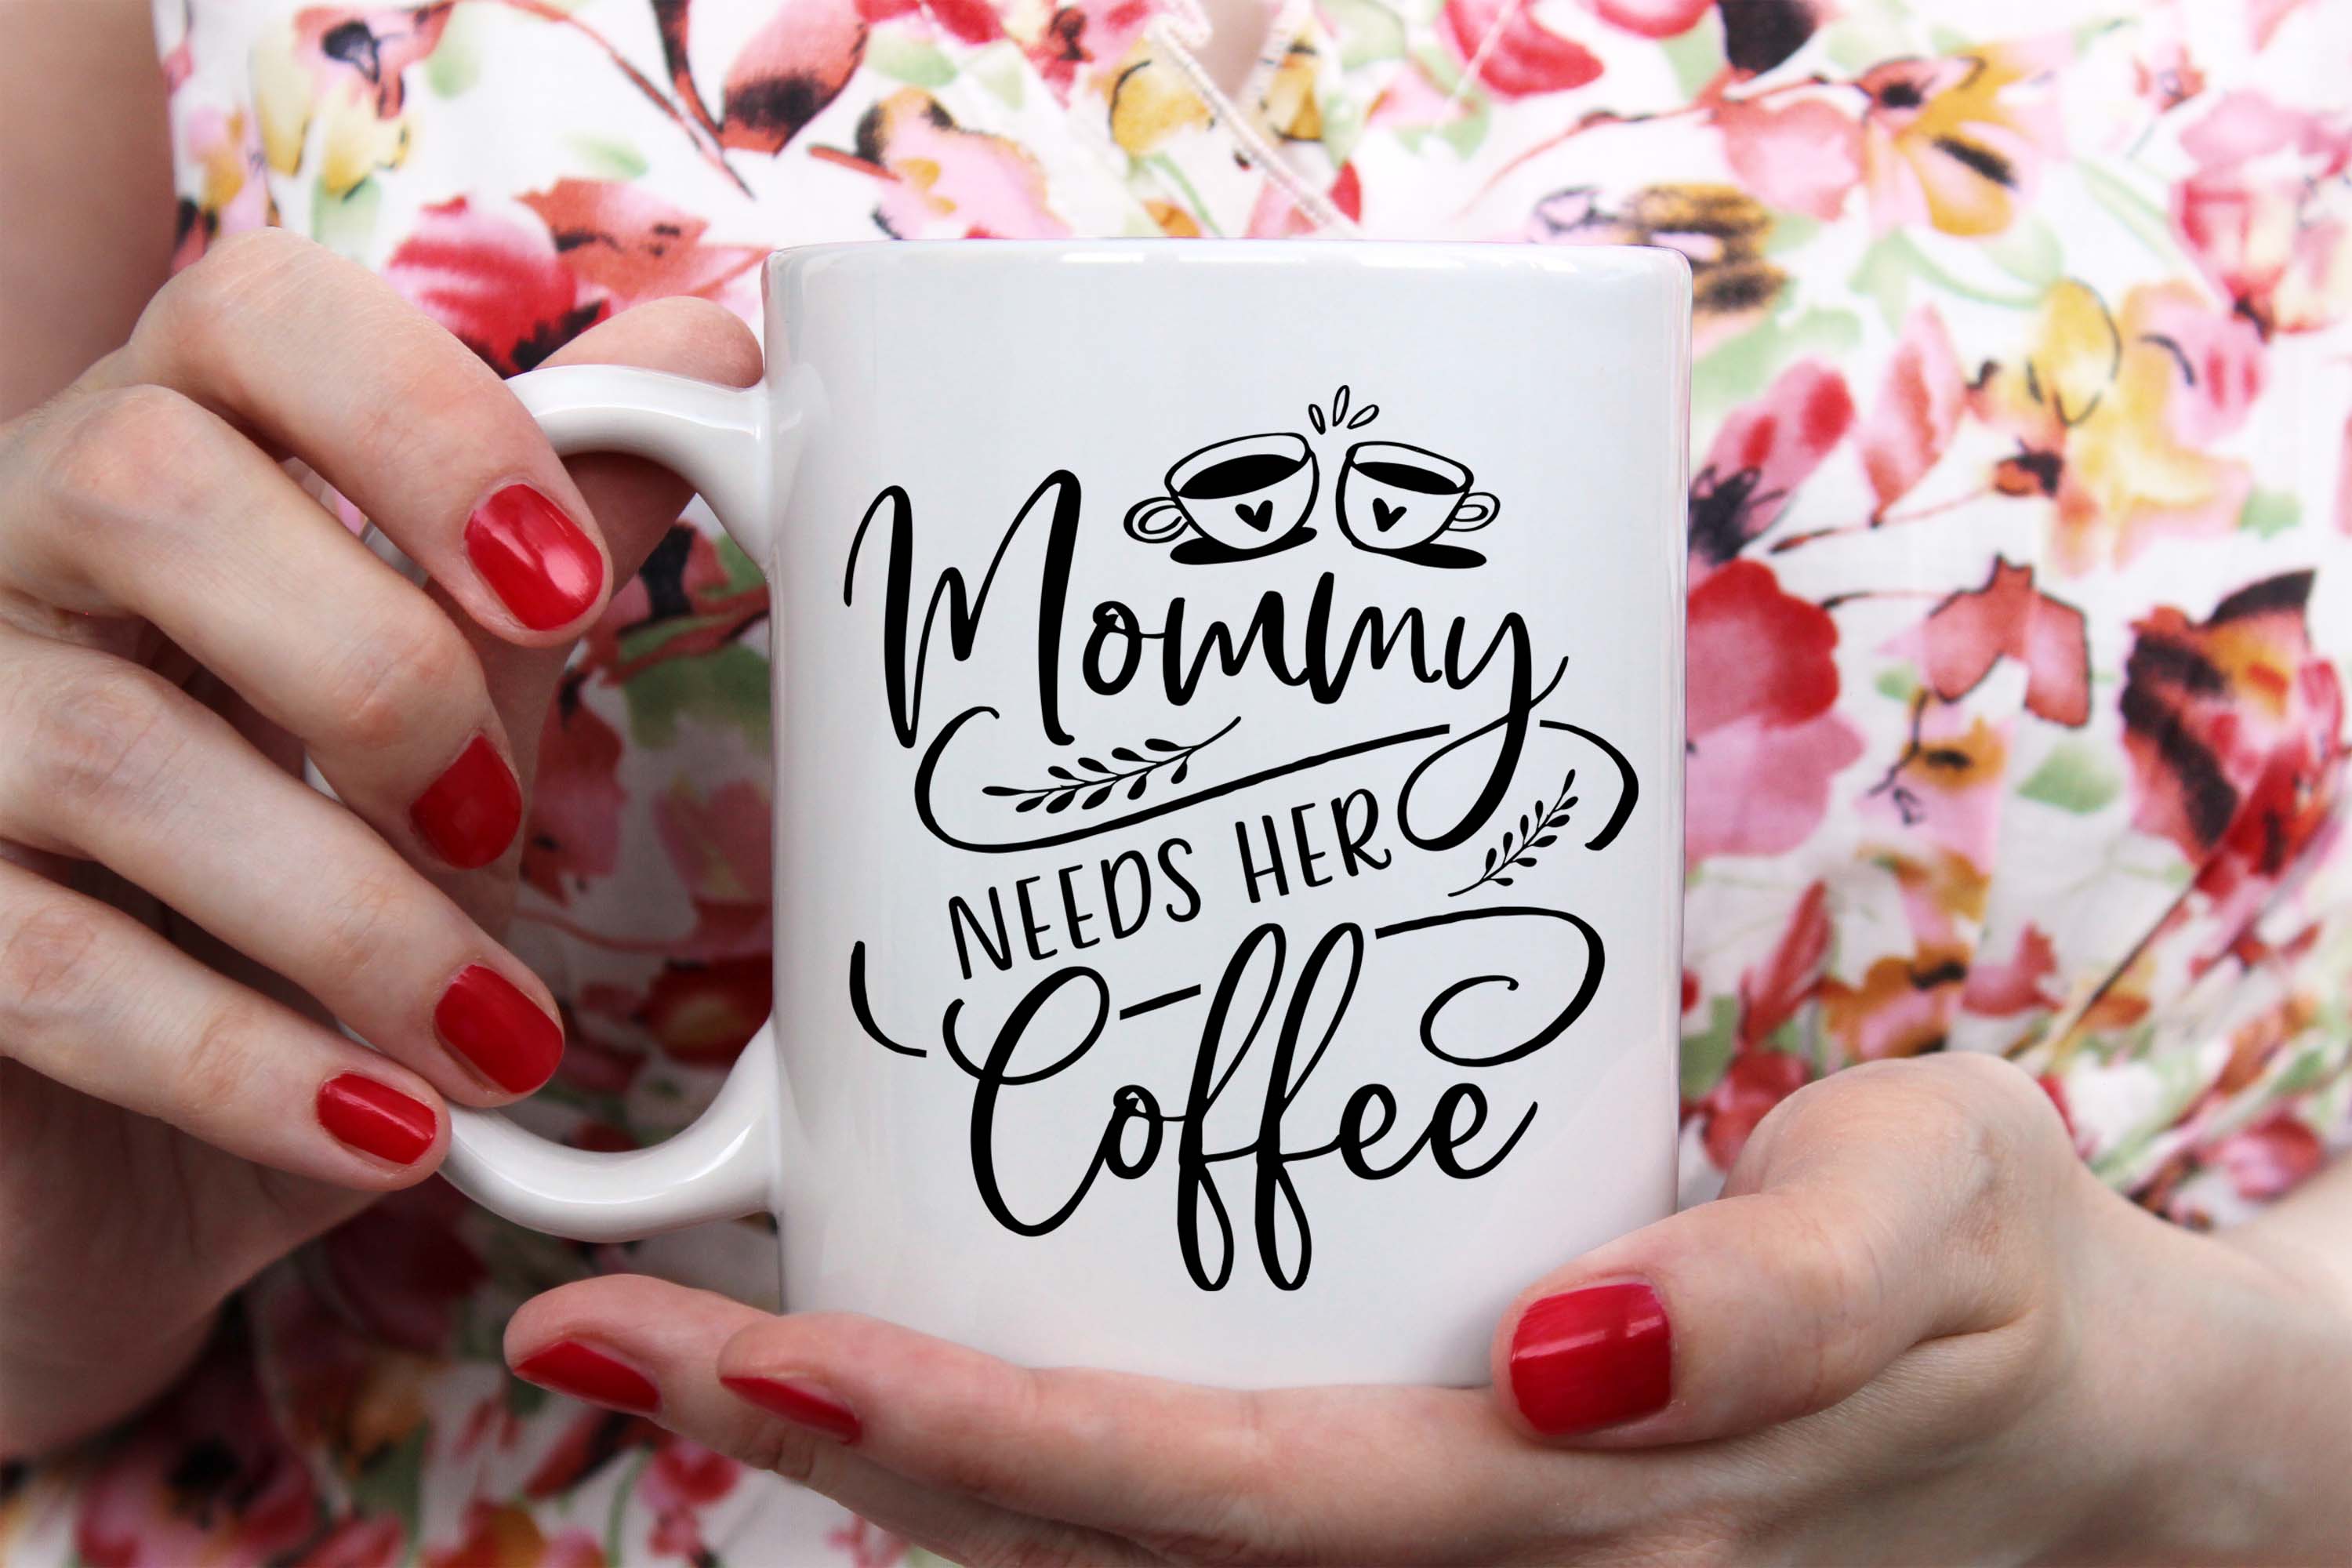 Download Mommy needs her coffee SVG DXF PNG (48280) | Cut Files ...